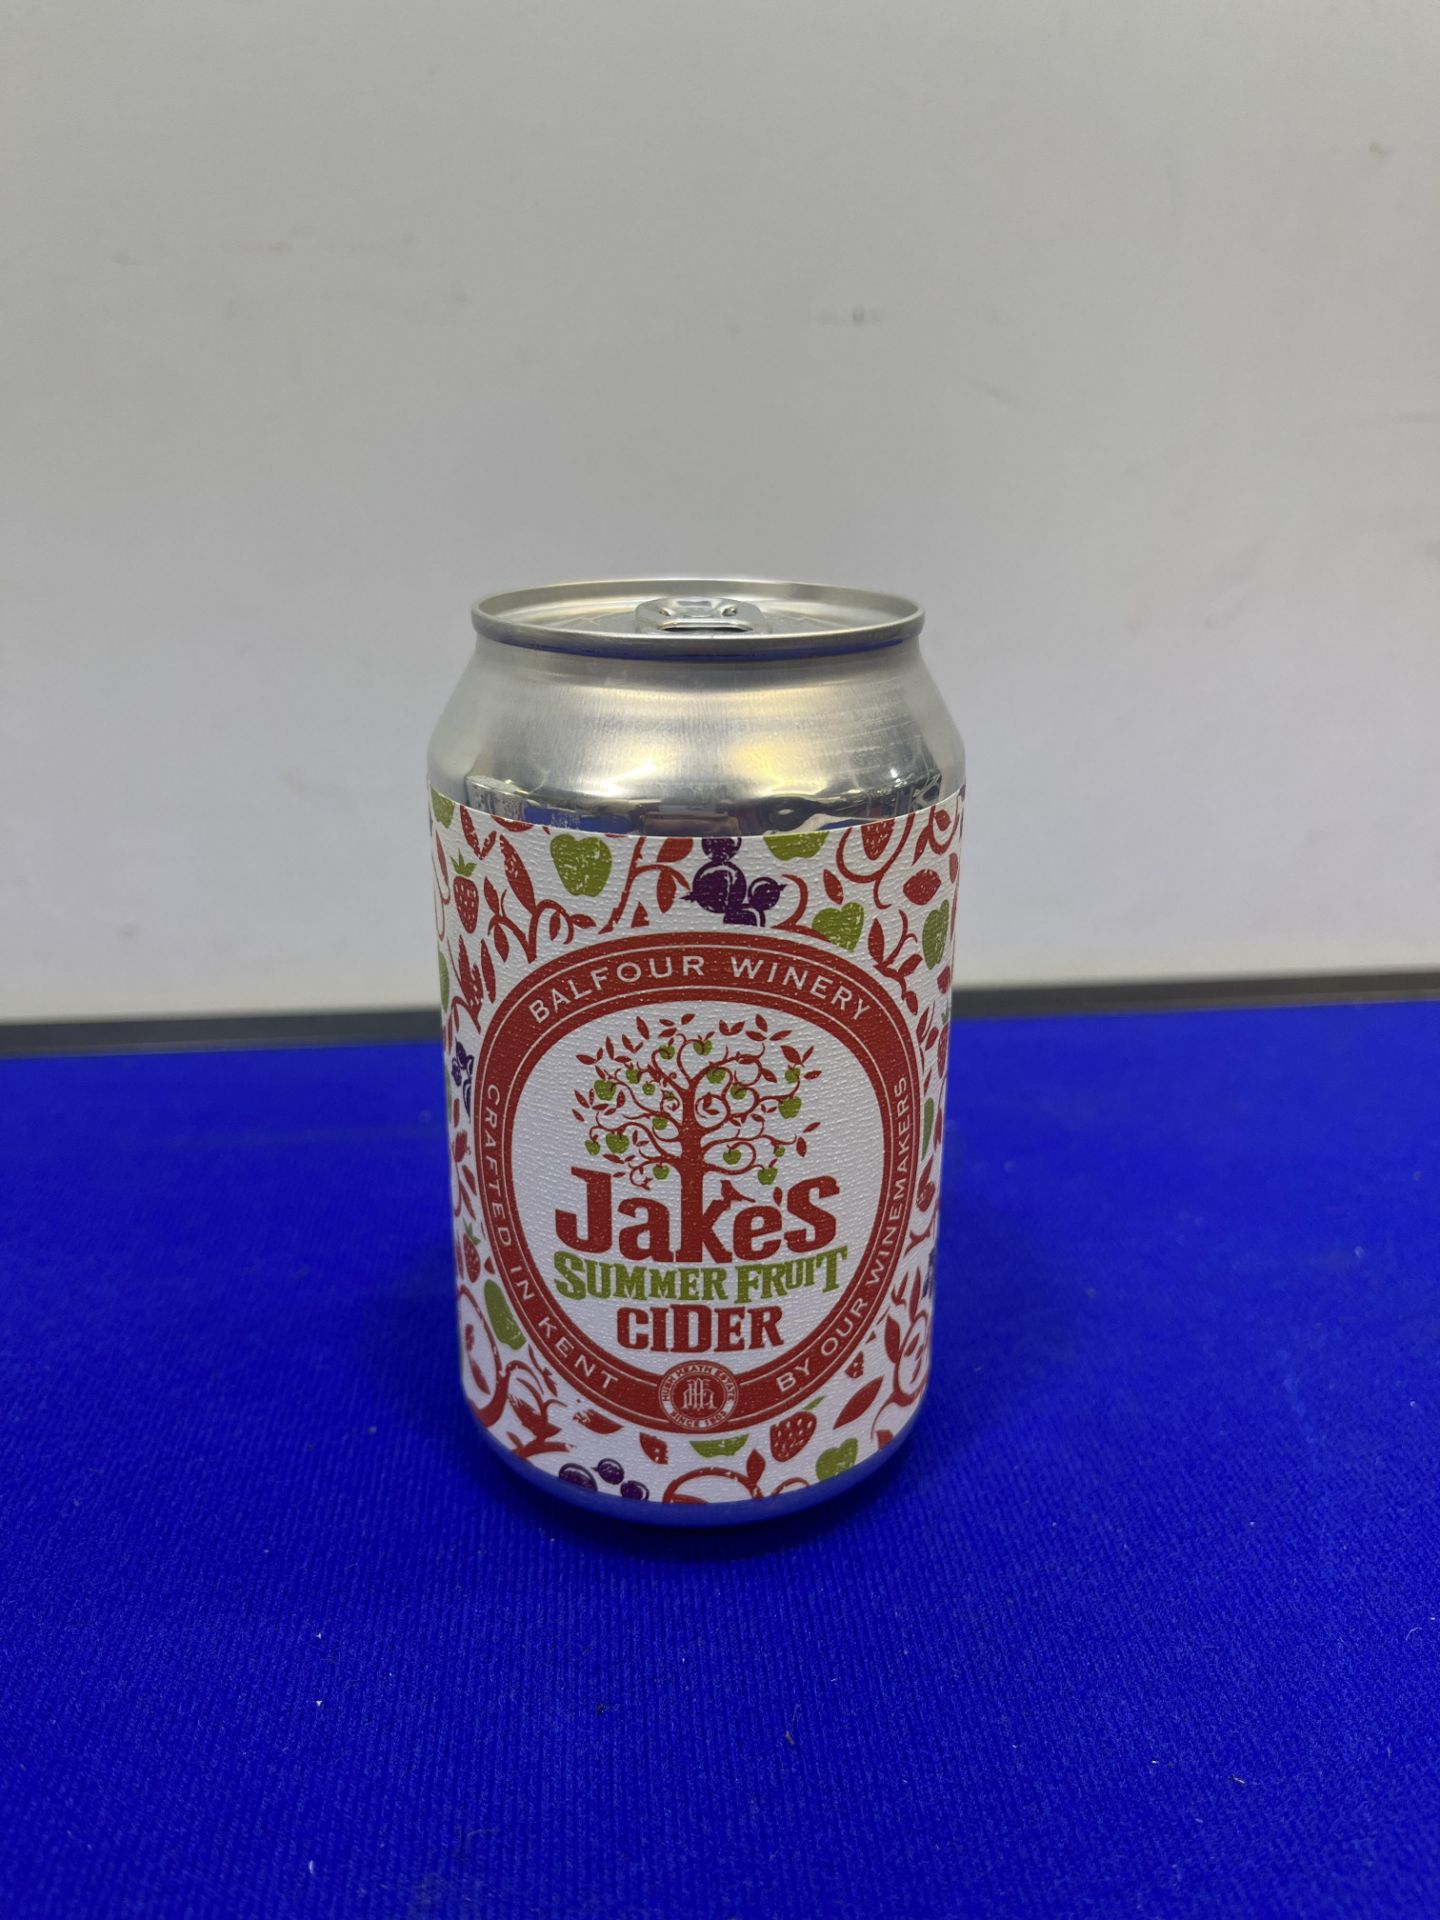 90 x Various Cans of 330ml Balfour Winery Jake's Drinks - Image 2 of 5